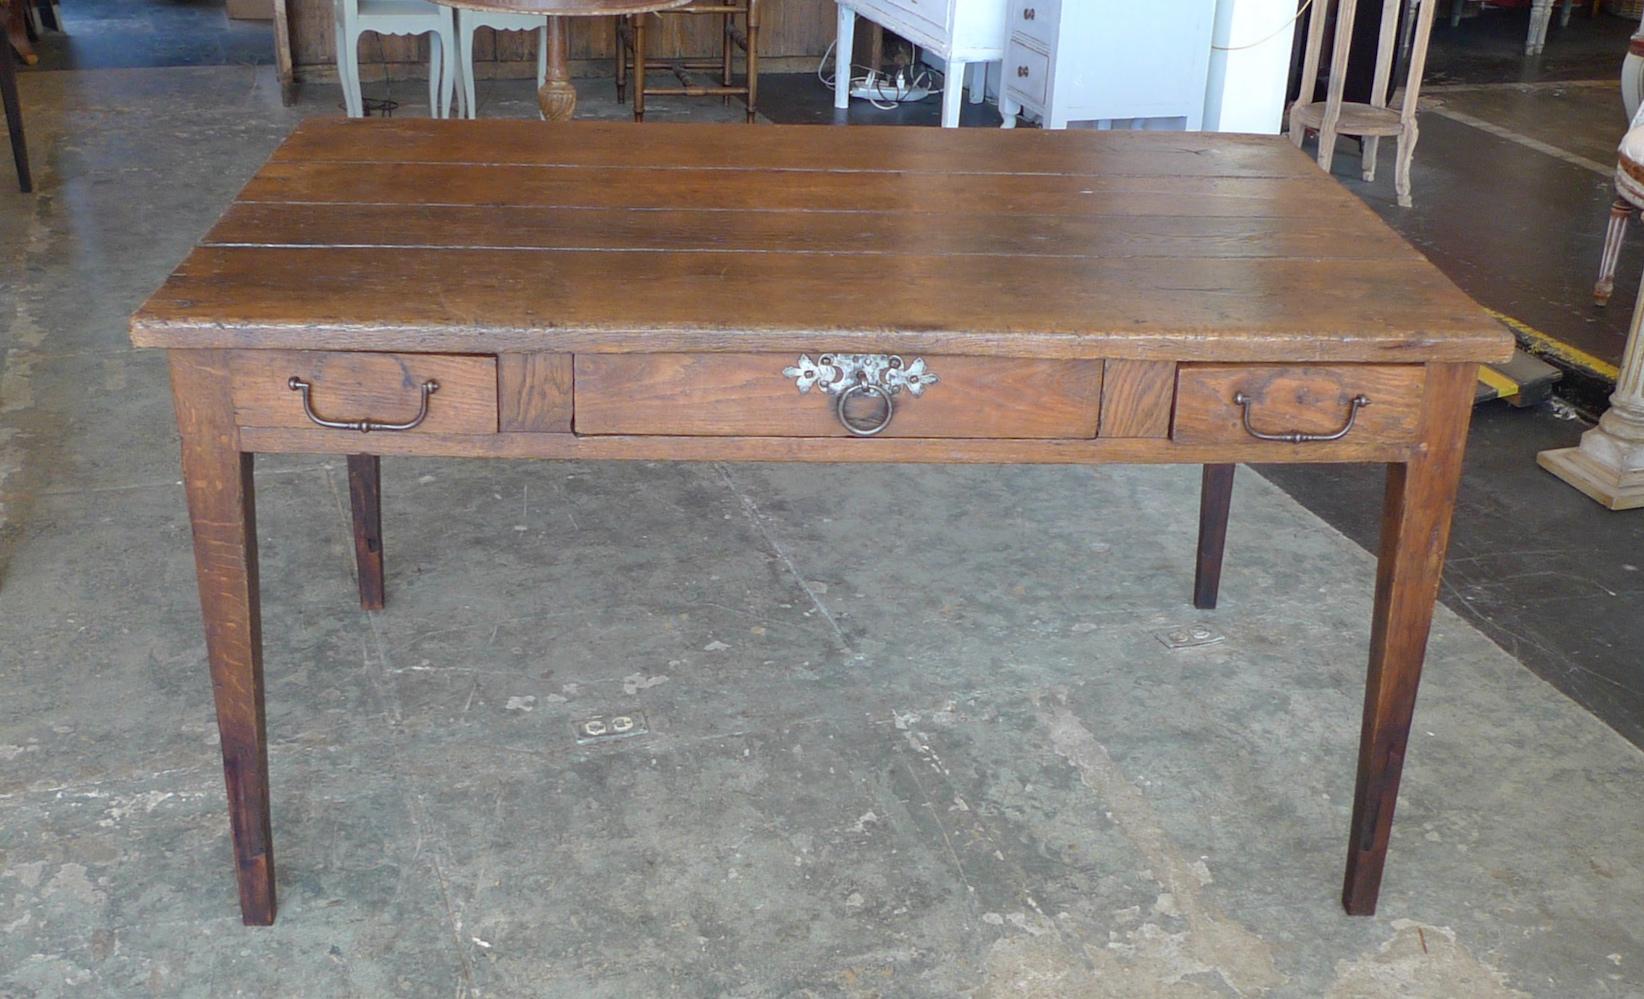 Stained French XIX Walnut Dining Table or Desk with 3 Drawers and Original Hardware.